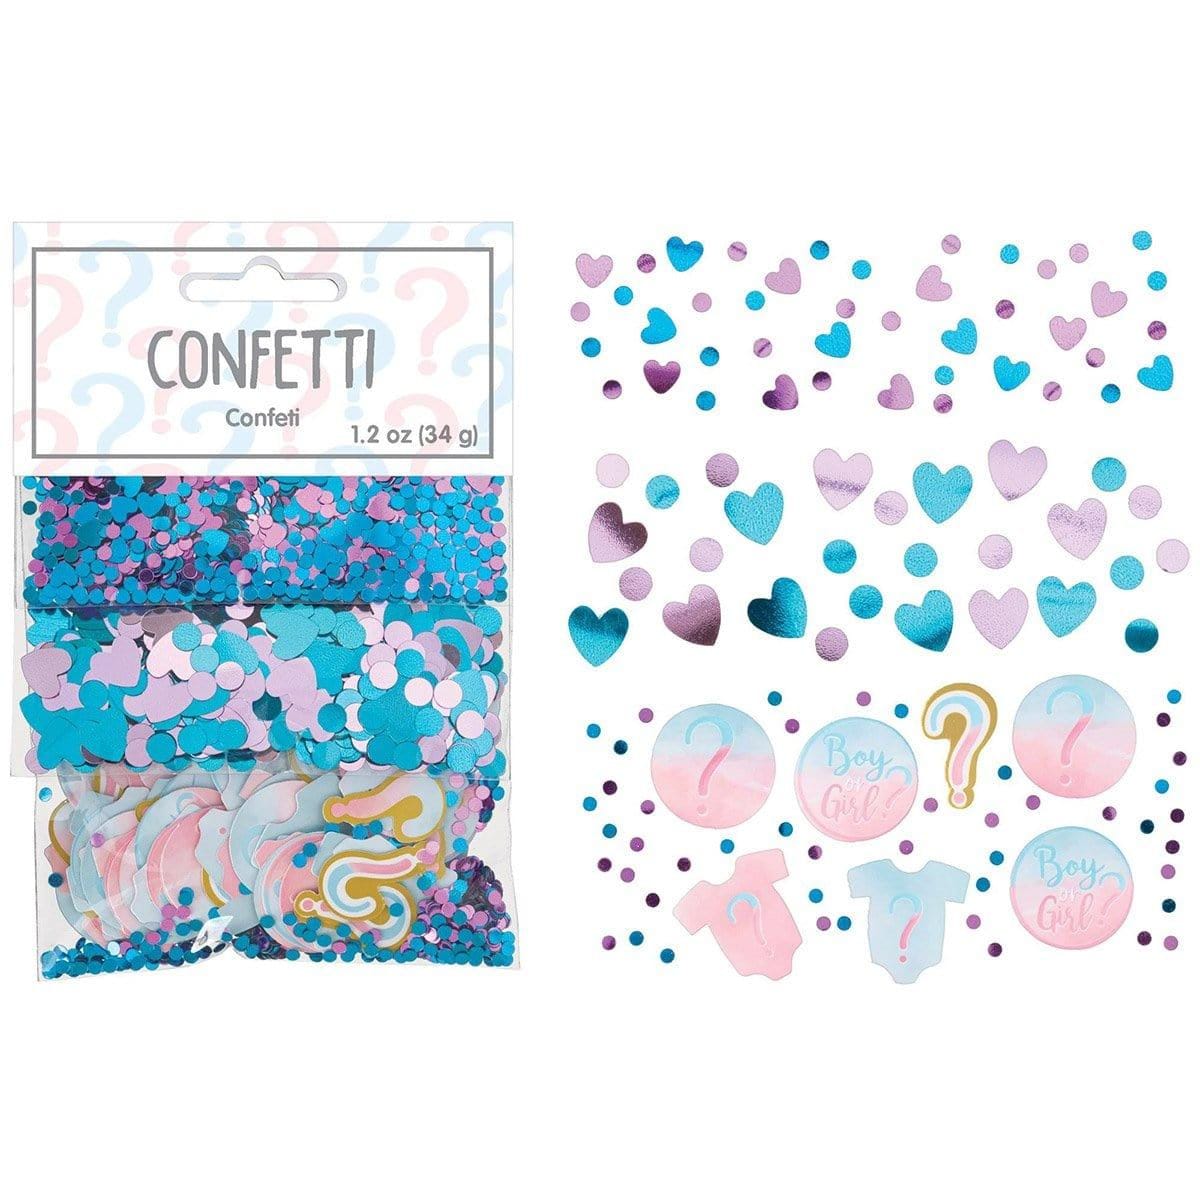 Buy Baby Shower Gender Reveal Party: Confetti 1.2 Oz. sold at Party Expert